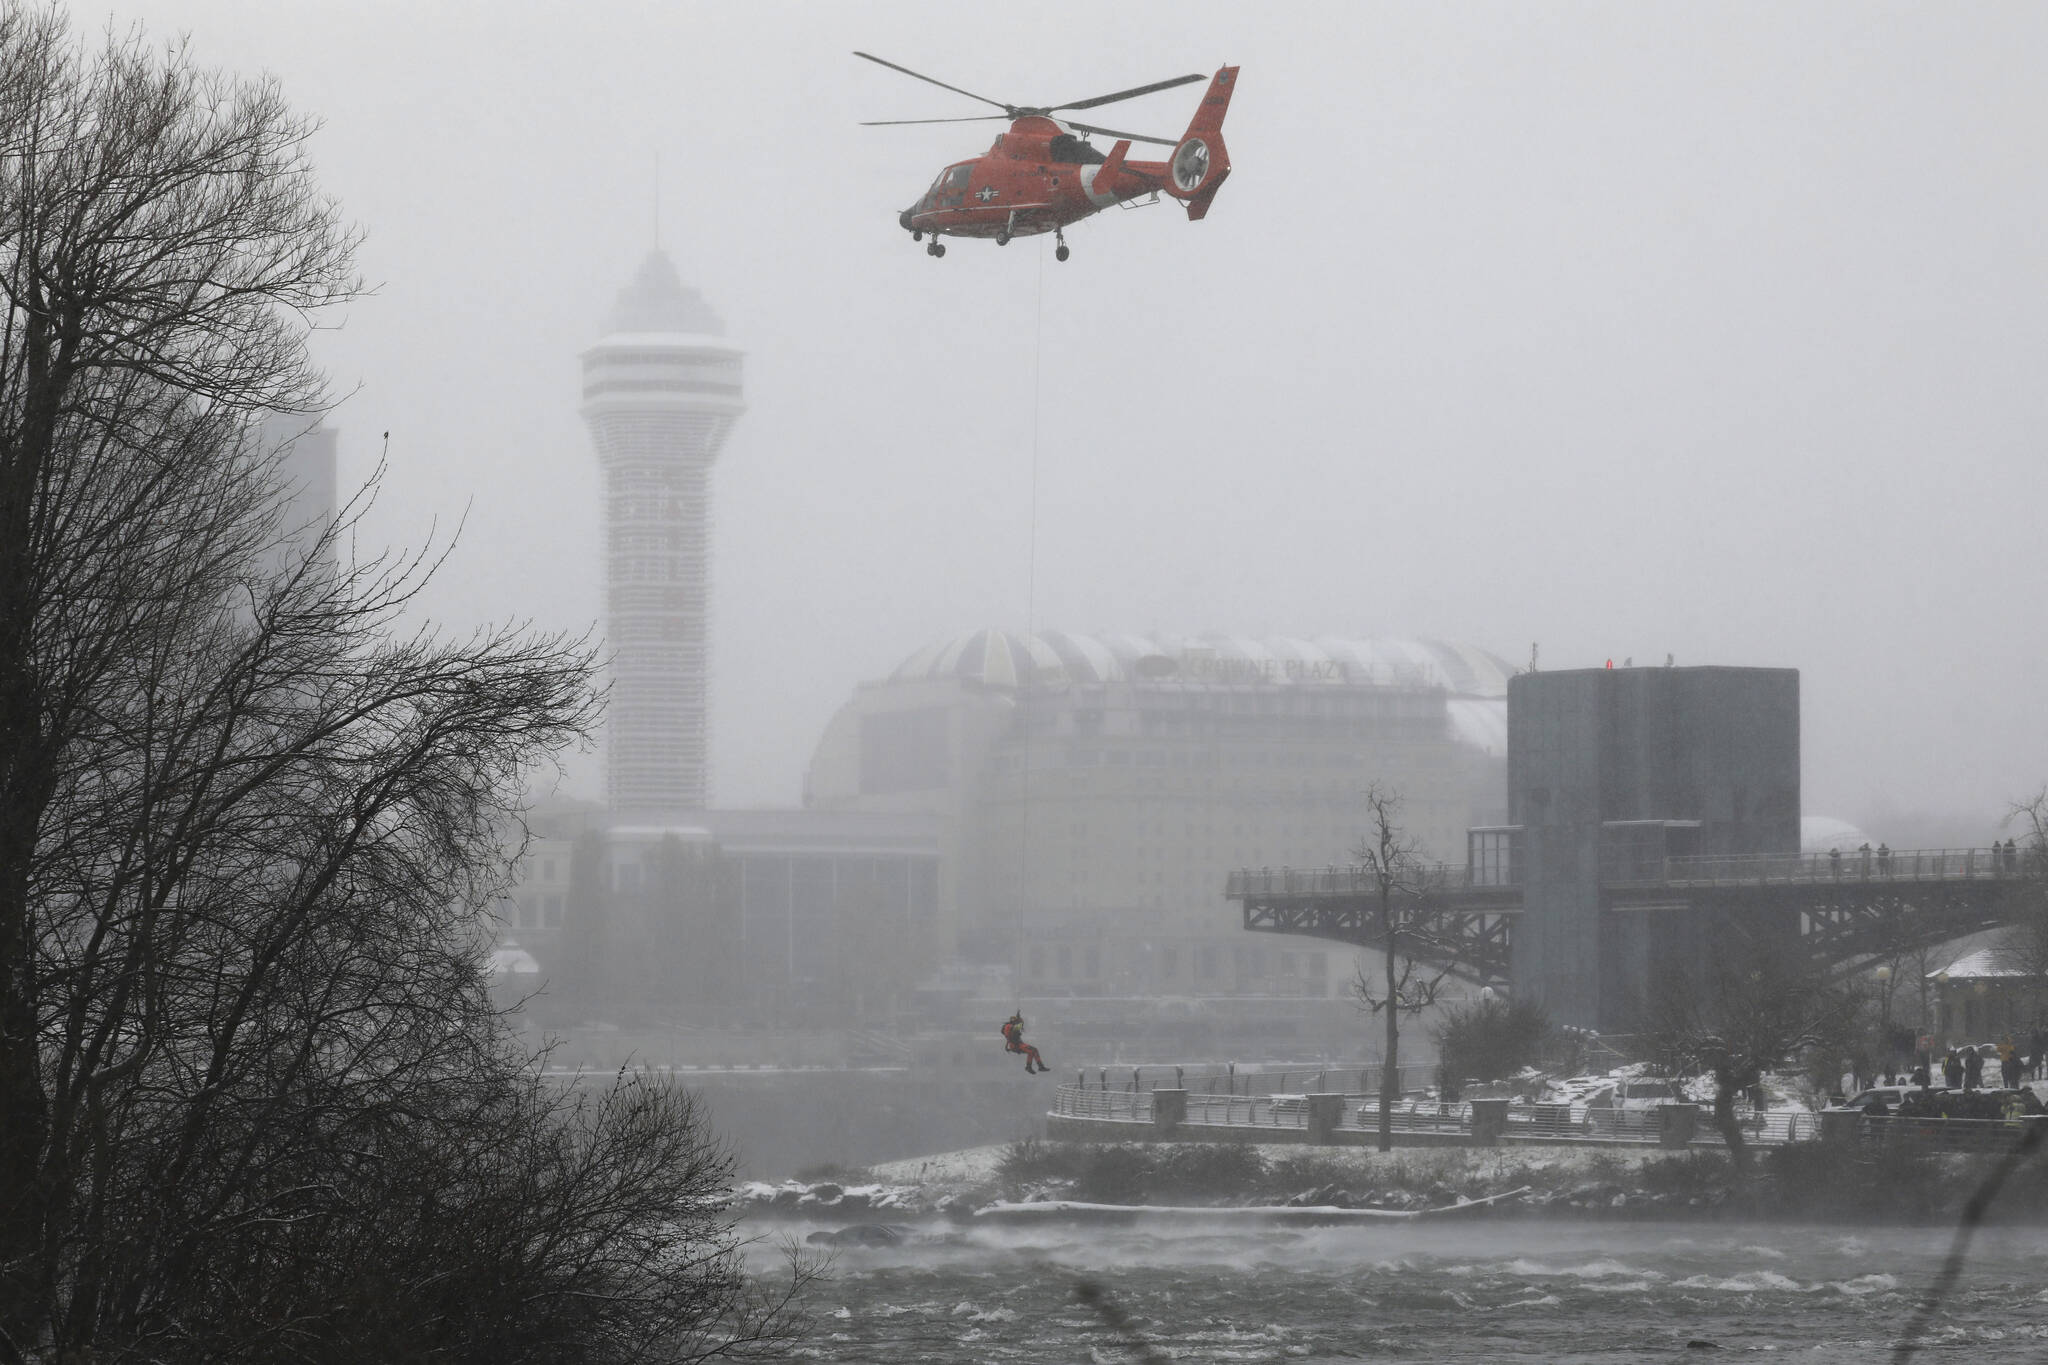 A U.S. Coast Guard rescue diver is lowered toward the vehicle lodged in the water at the brink of Niagara Falls, Wednesday, Dec. 8, 2021. (Derek Gee/Buffalo News via AP)